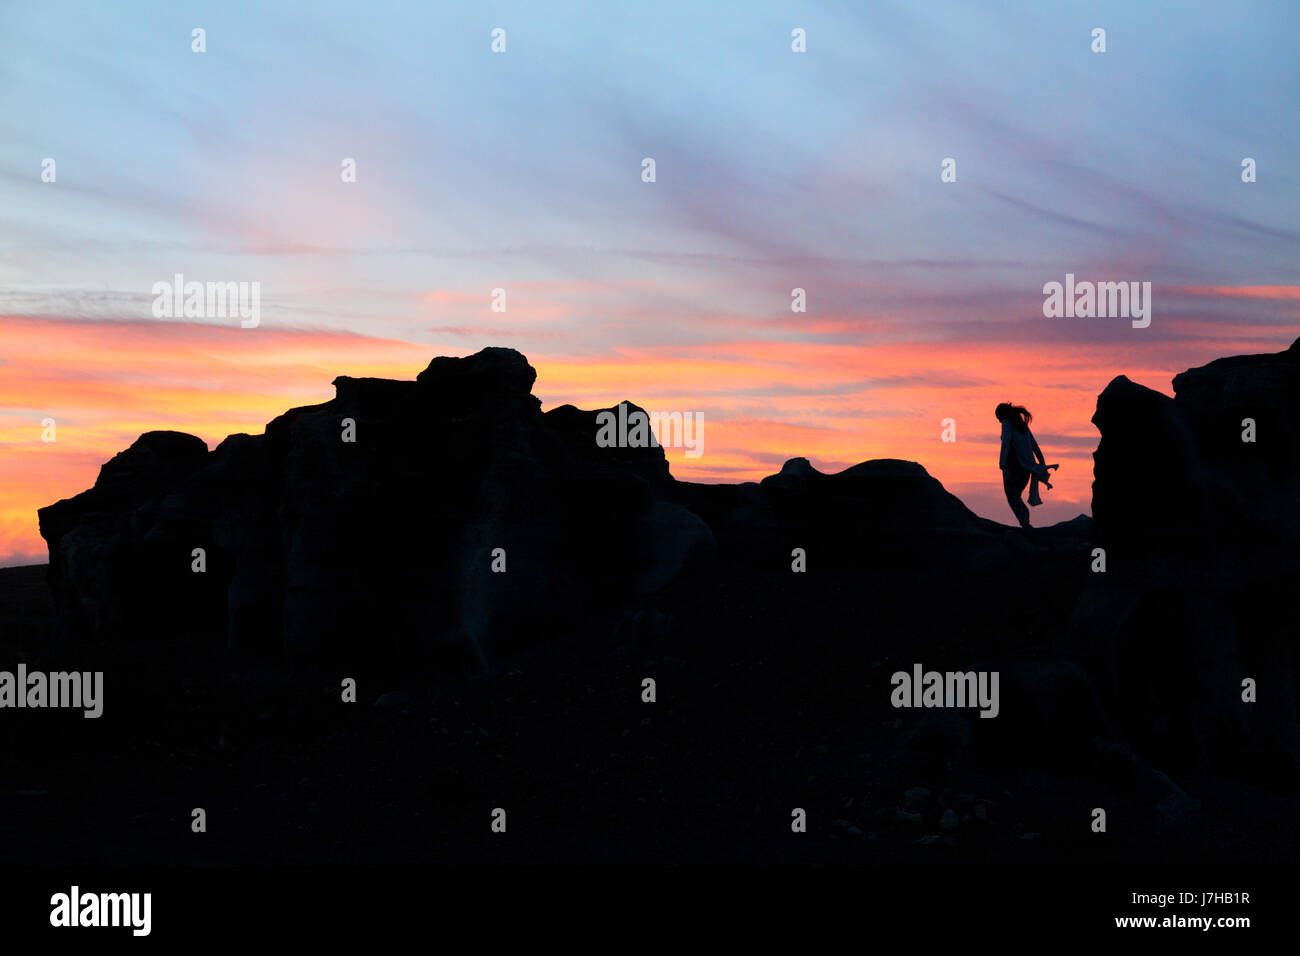 Lanzarote sunset - a woman standing on a volcanic outcrop at sunset, Lanzarote, Canary Islands Europe. Concept / conceptual image Stock Photo